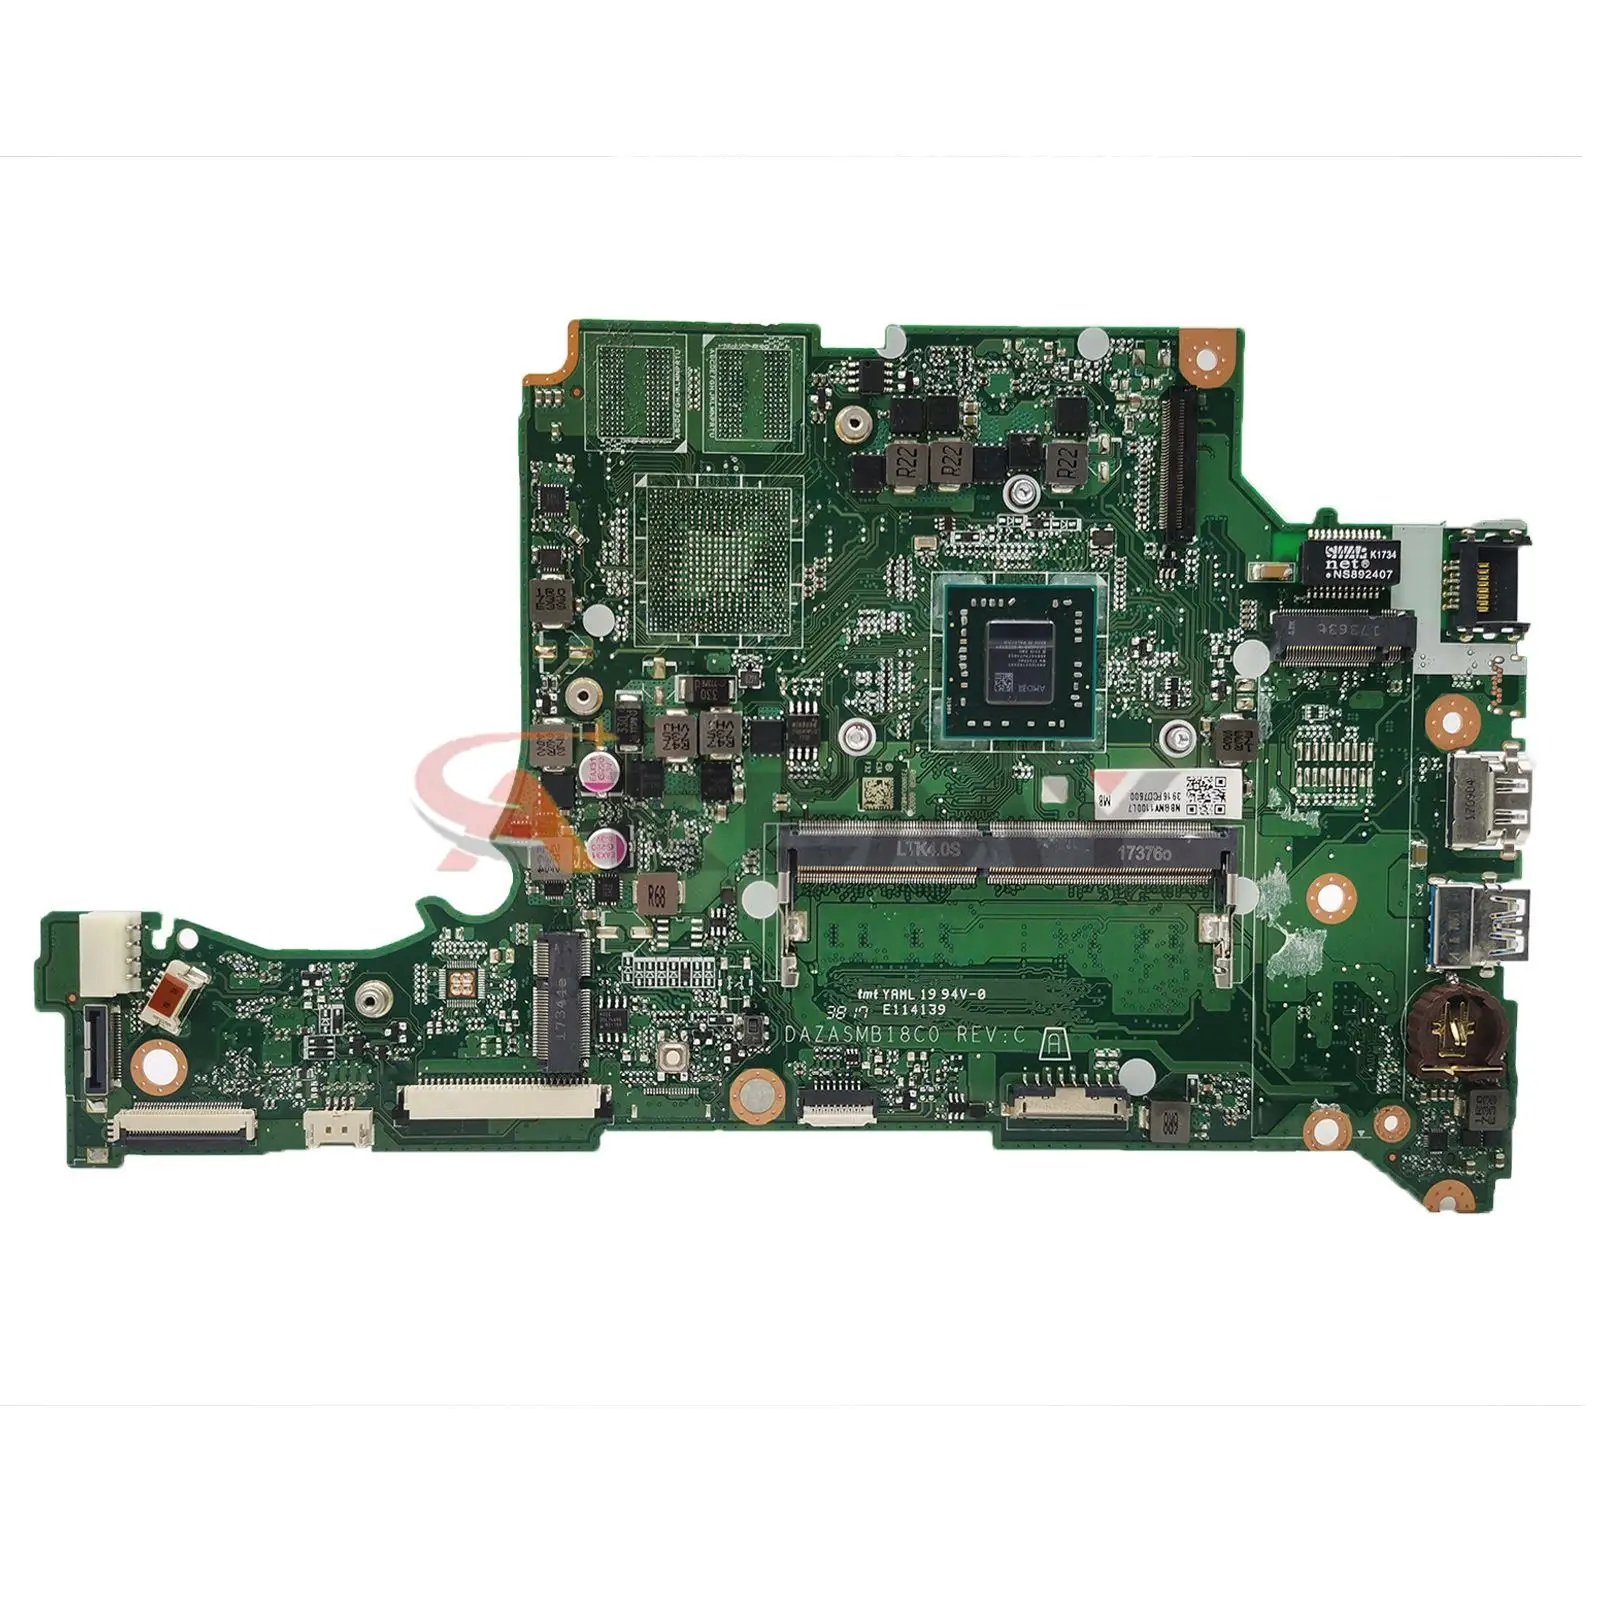 

DAZASMB18C0 ZAS For Acer Aspire A315-21G A315-31 Laptop Motherboard with A6-9220 A9-9420 CPU 4GB RAM Radeon 520 2GB 100% Tested